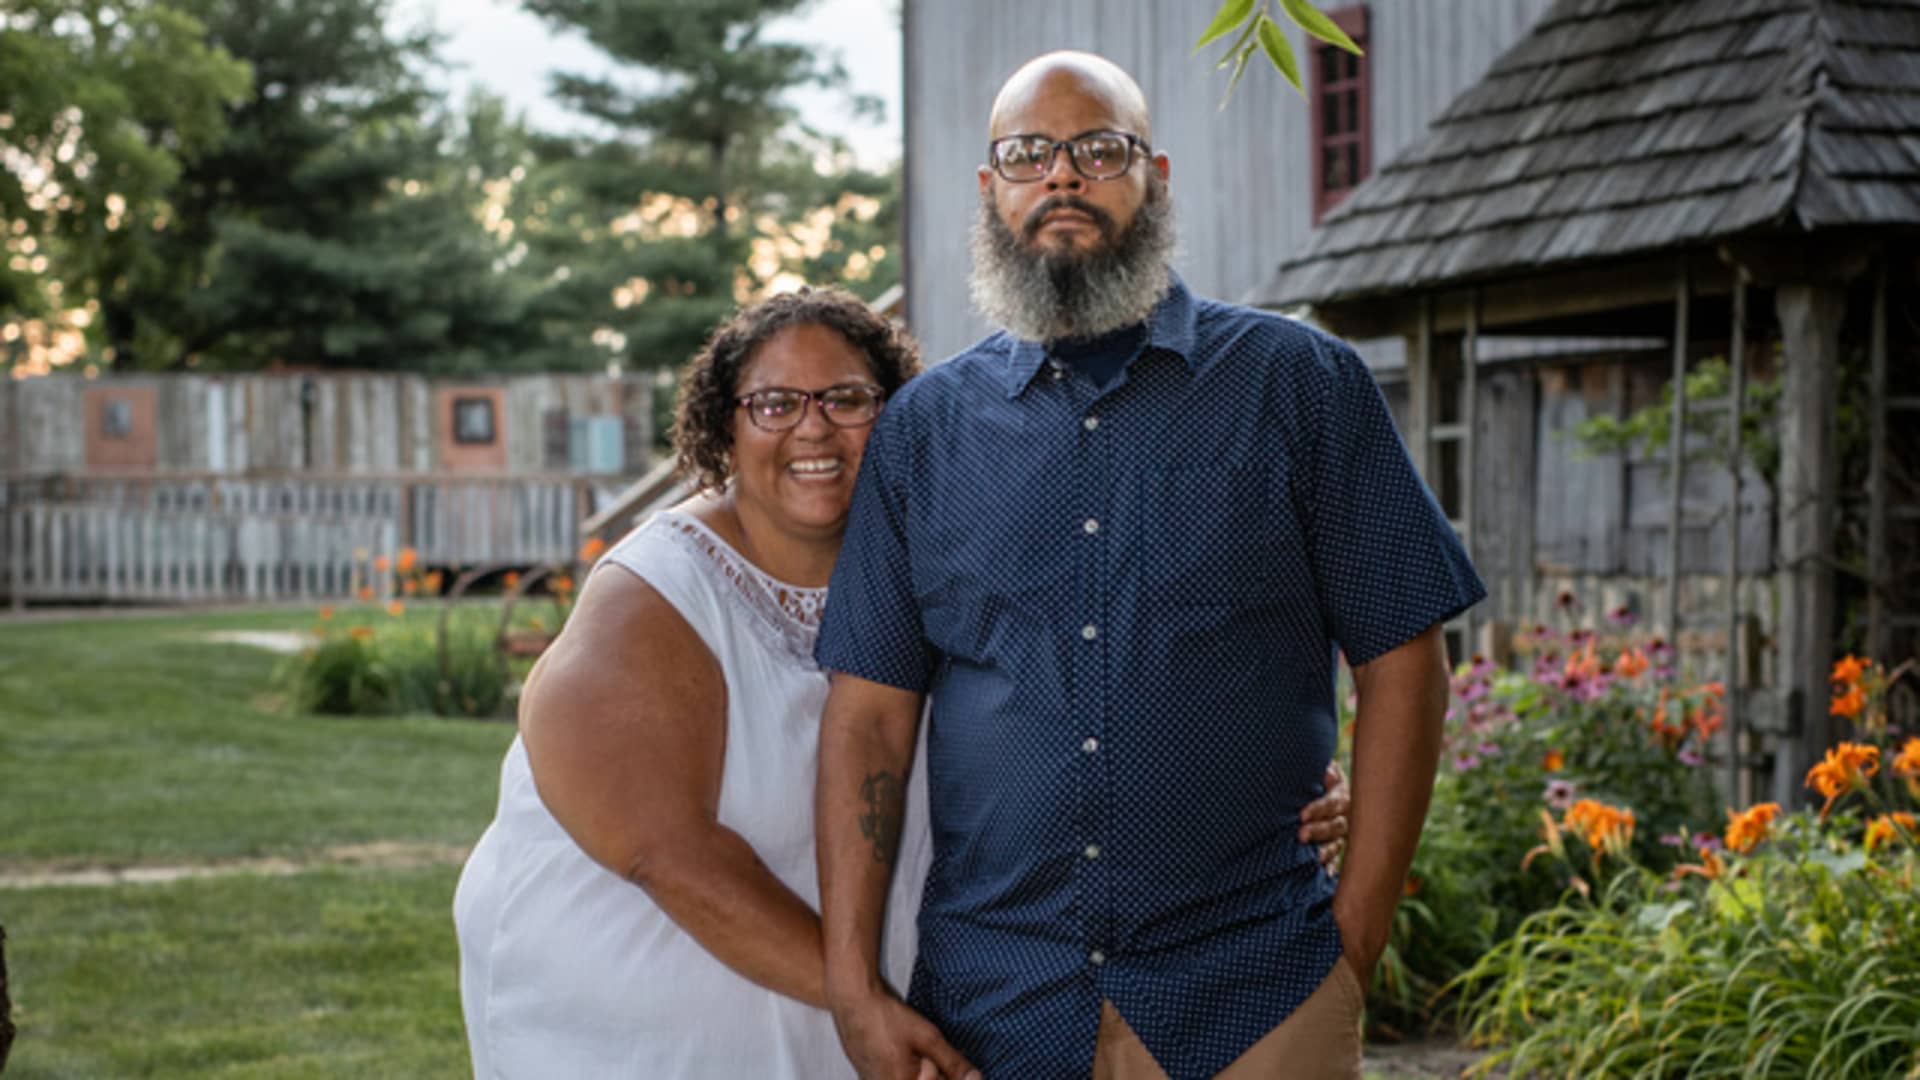 Chenon Hussey, left, and her husband are worried about providing for their family, including one child with special needs, once federal unemployment insurance benefits end.